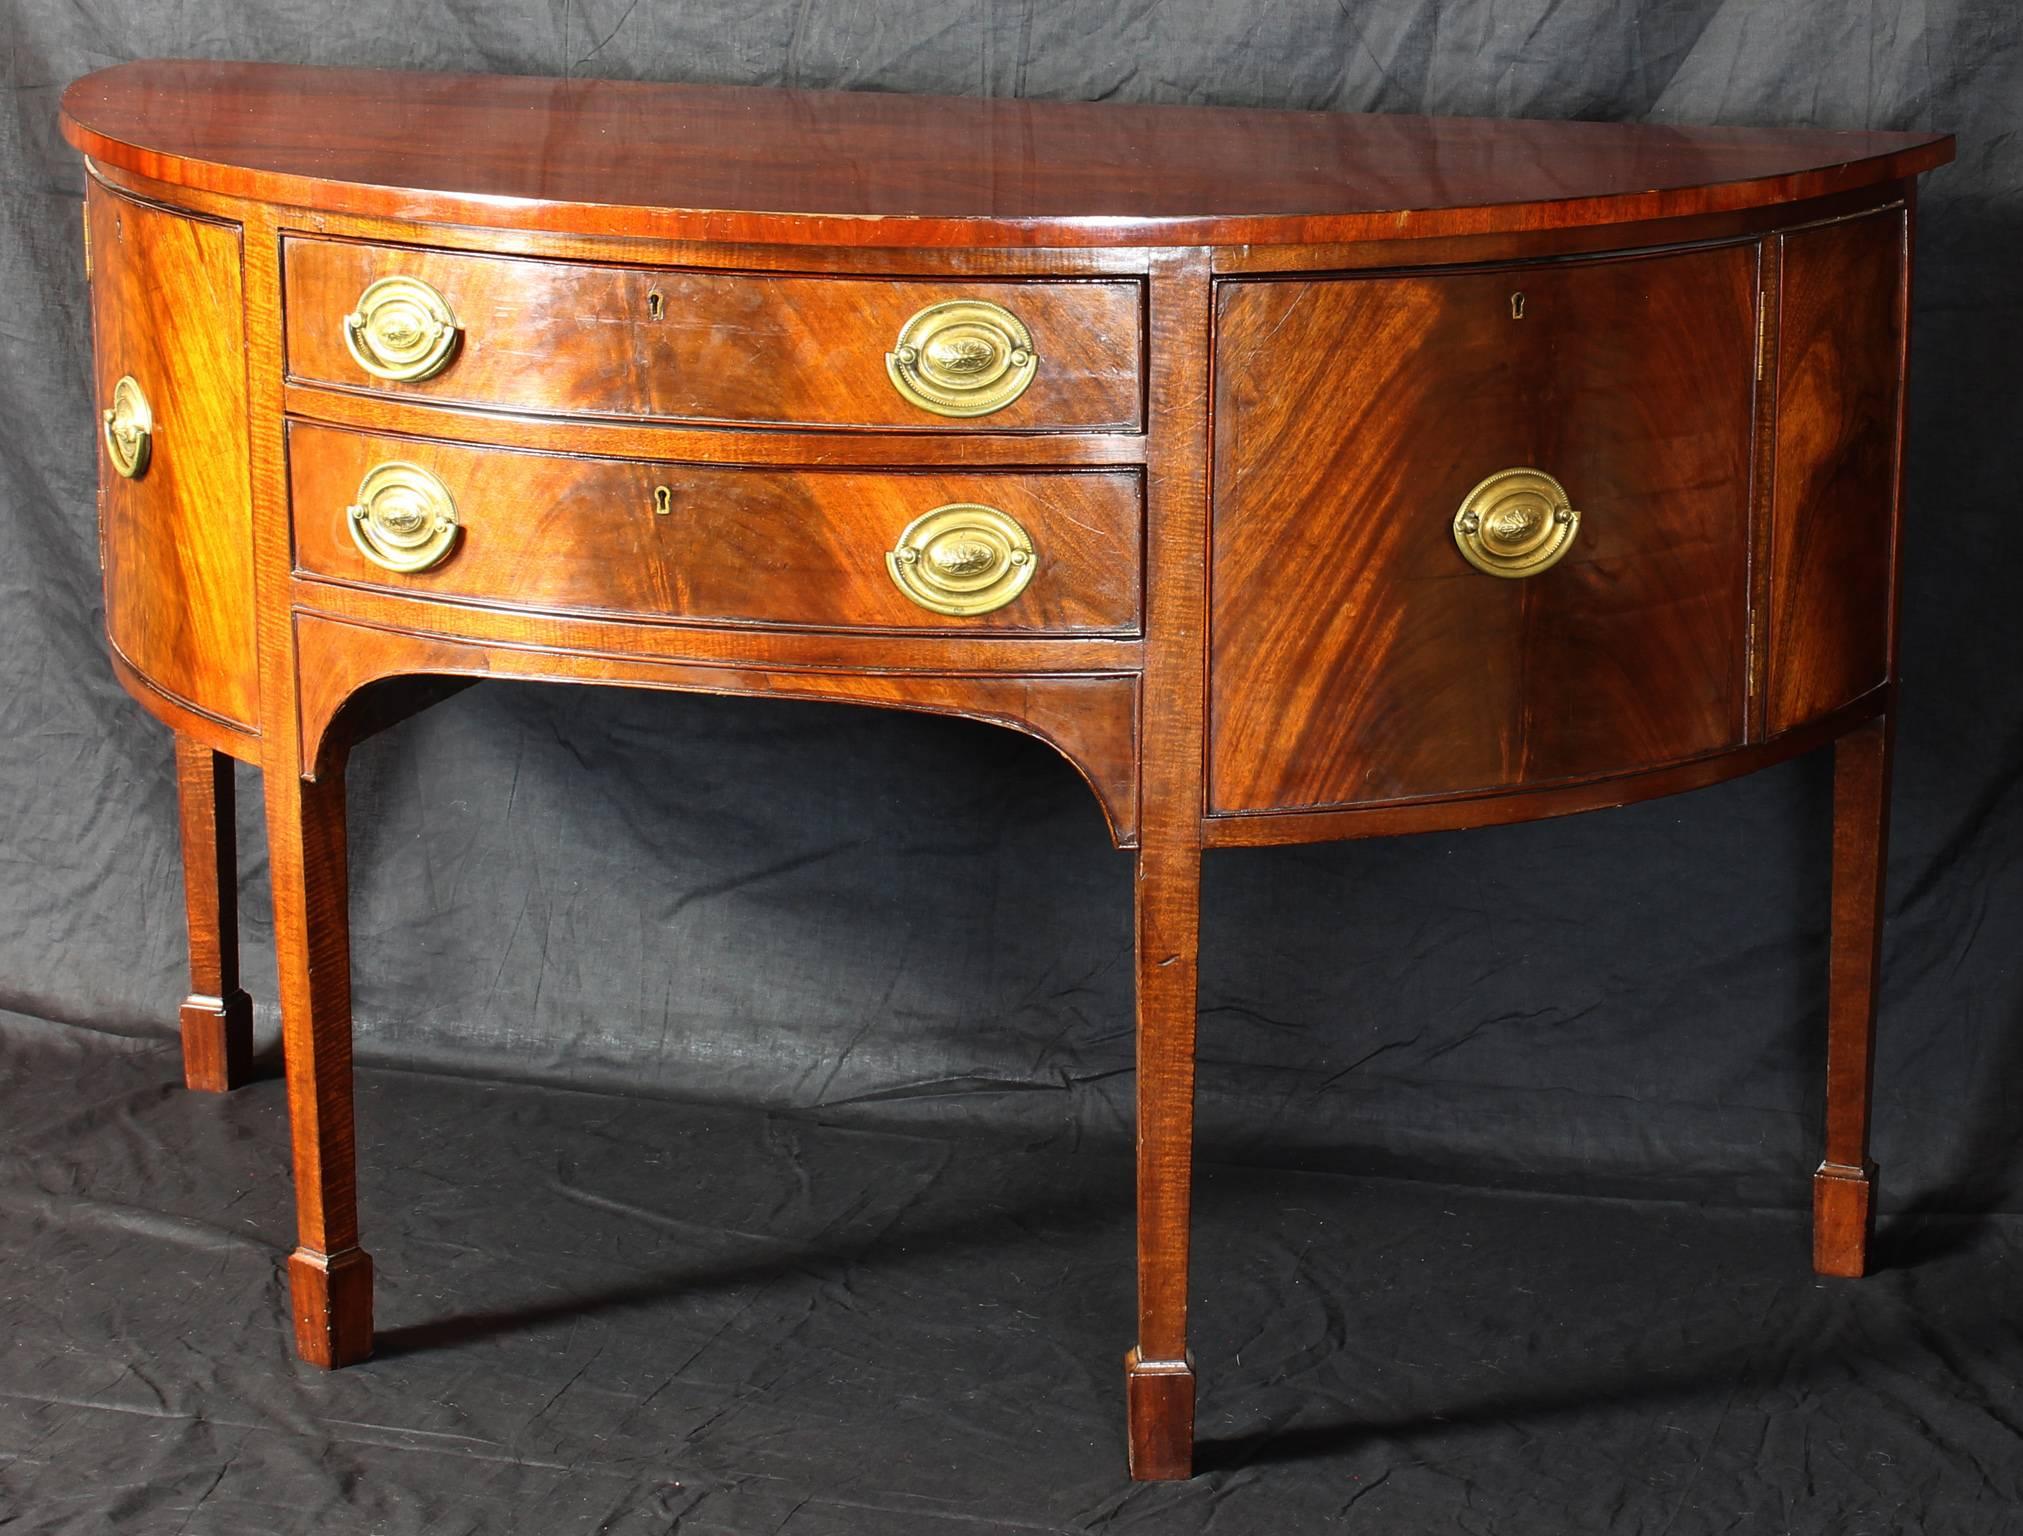 A late 18th century English mahogany demilune sideboard with original brass pulls.